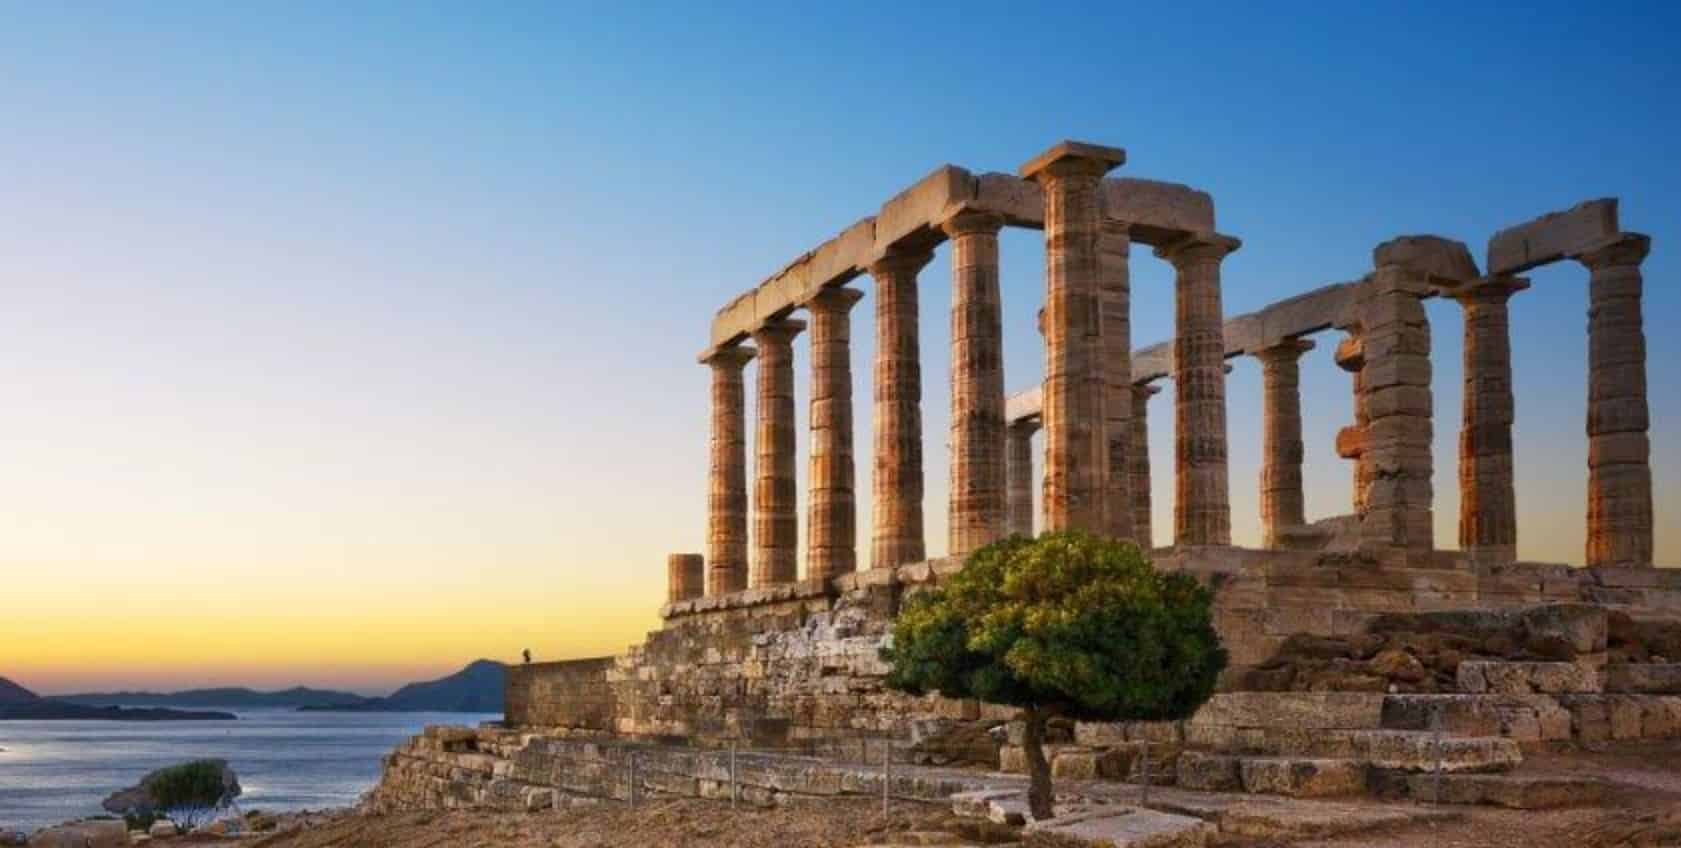 The Temple Of Poseidon at Sounion in Athens